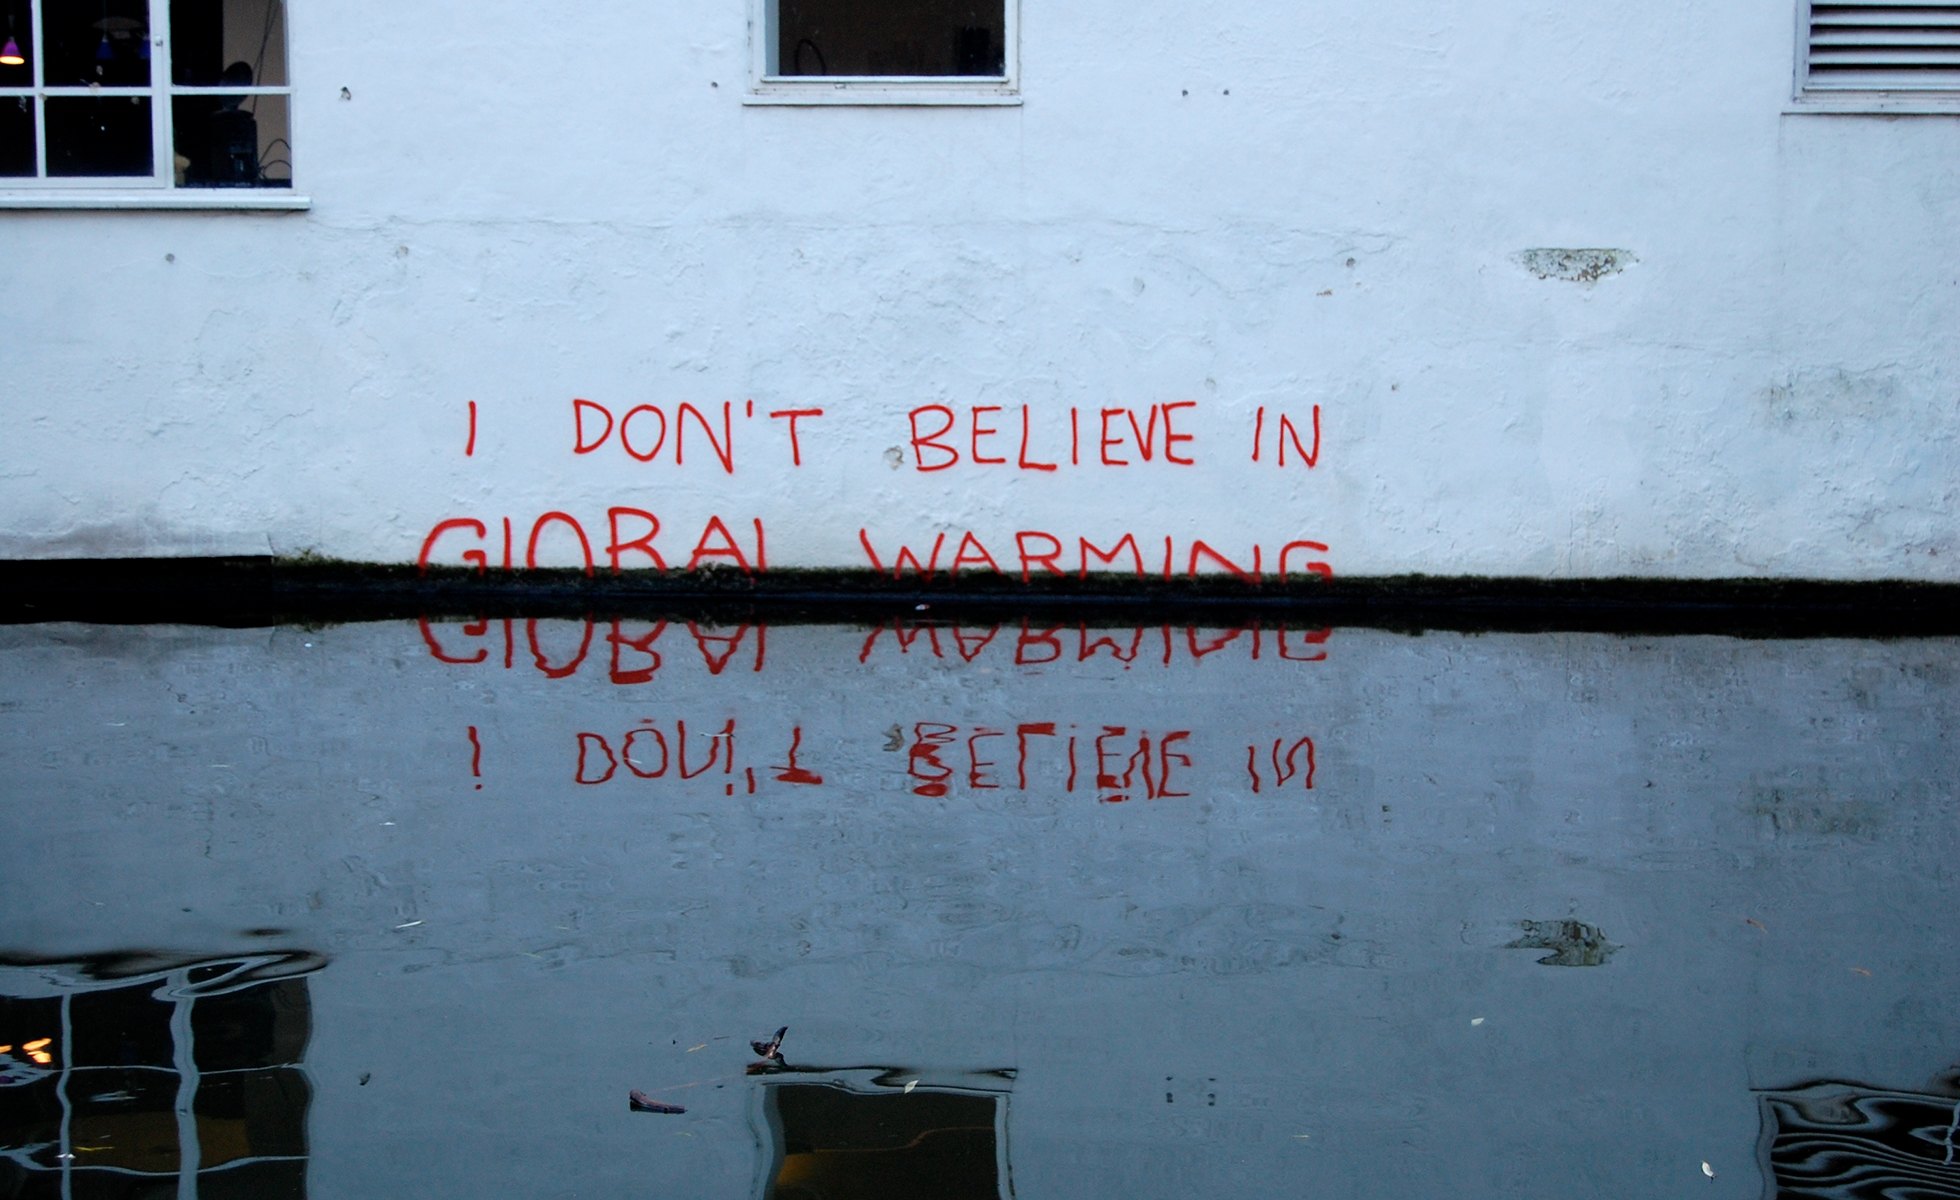 A graffiti tag stating "I don't believe in global warming" is immersed in rising water.